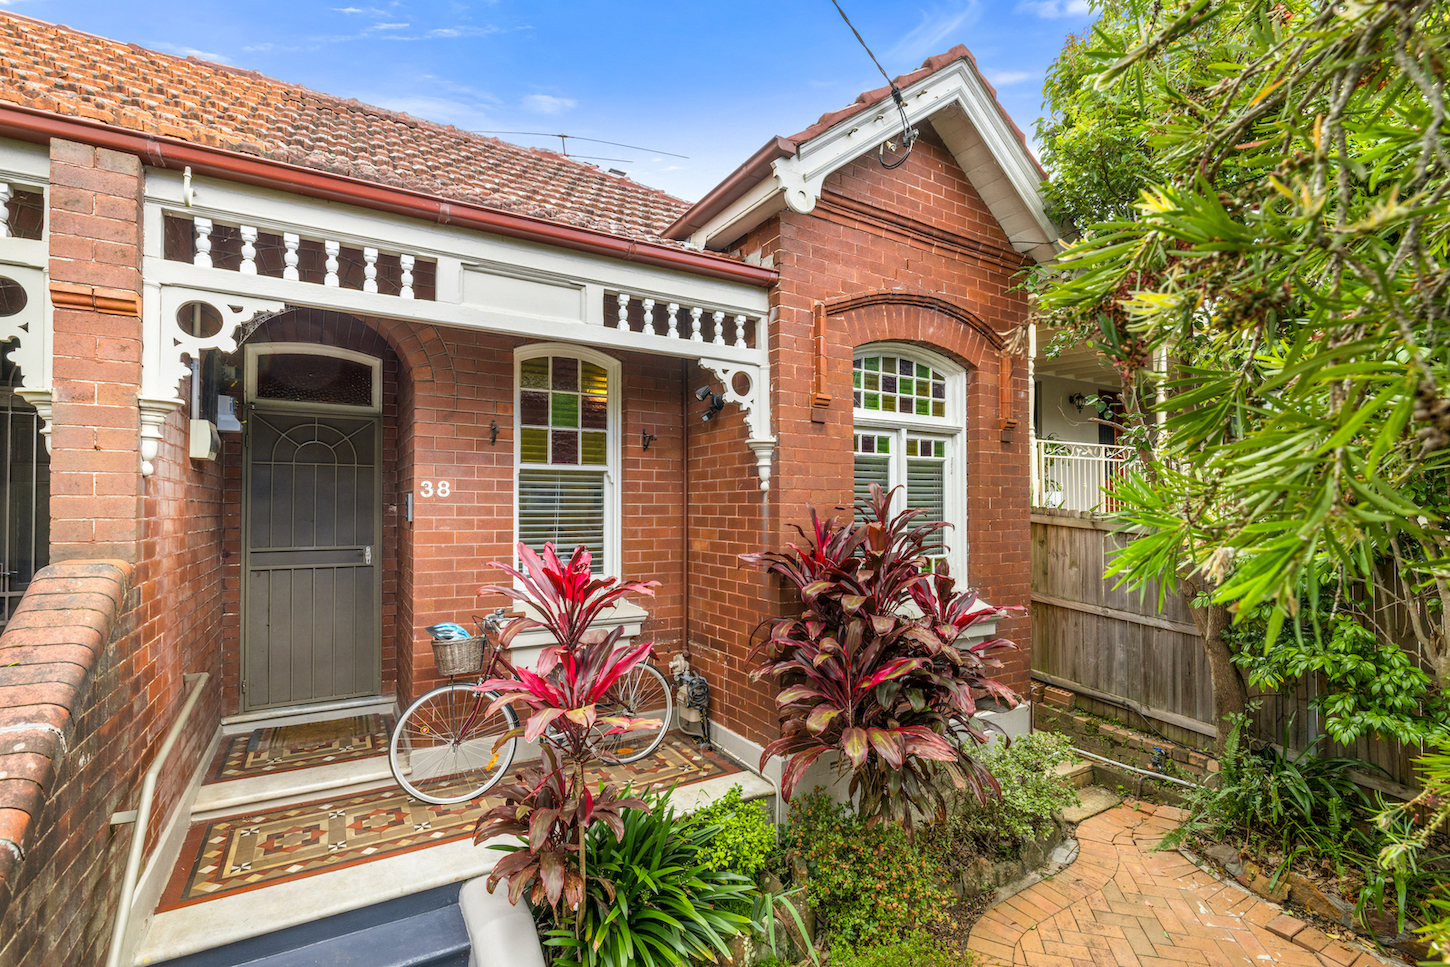 Federation home located in highly sought after Petersham Pocket.